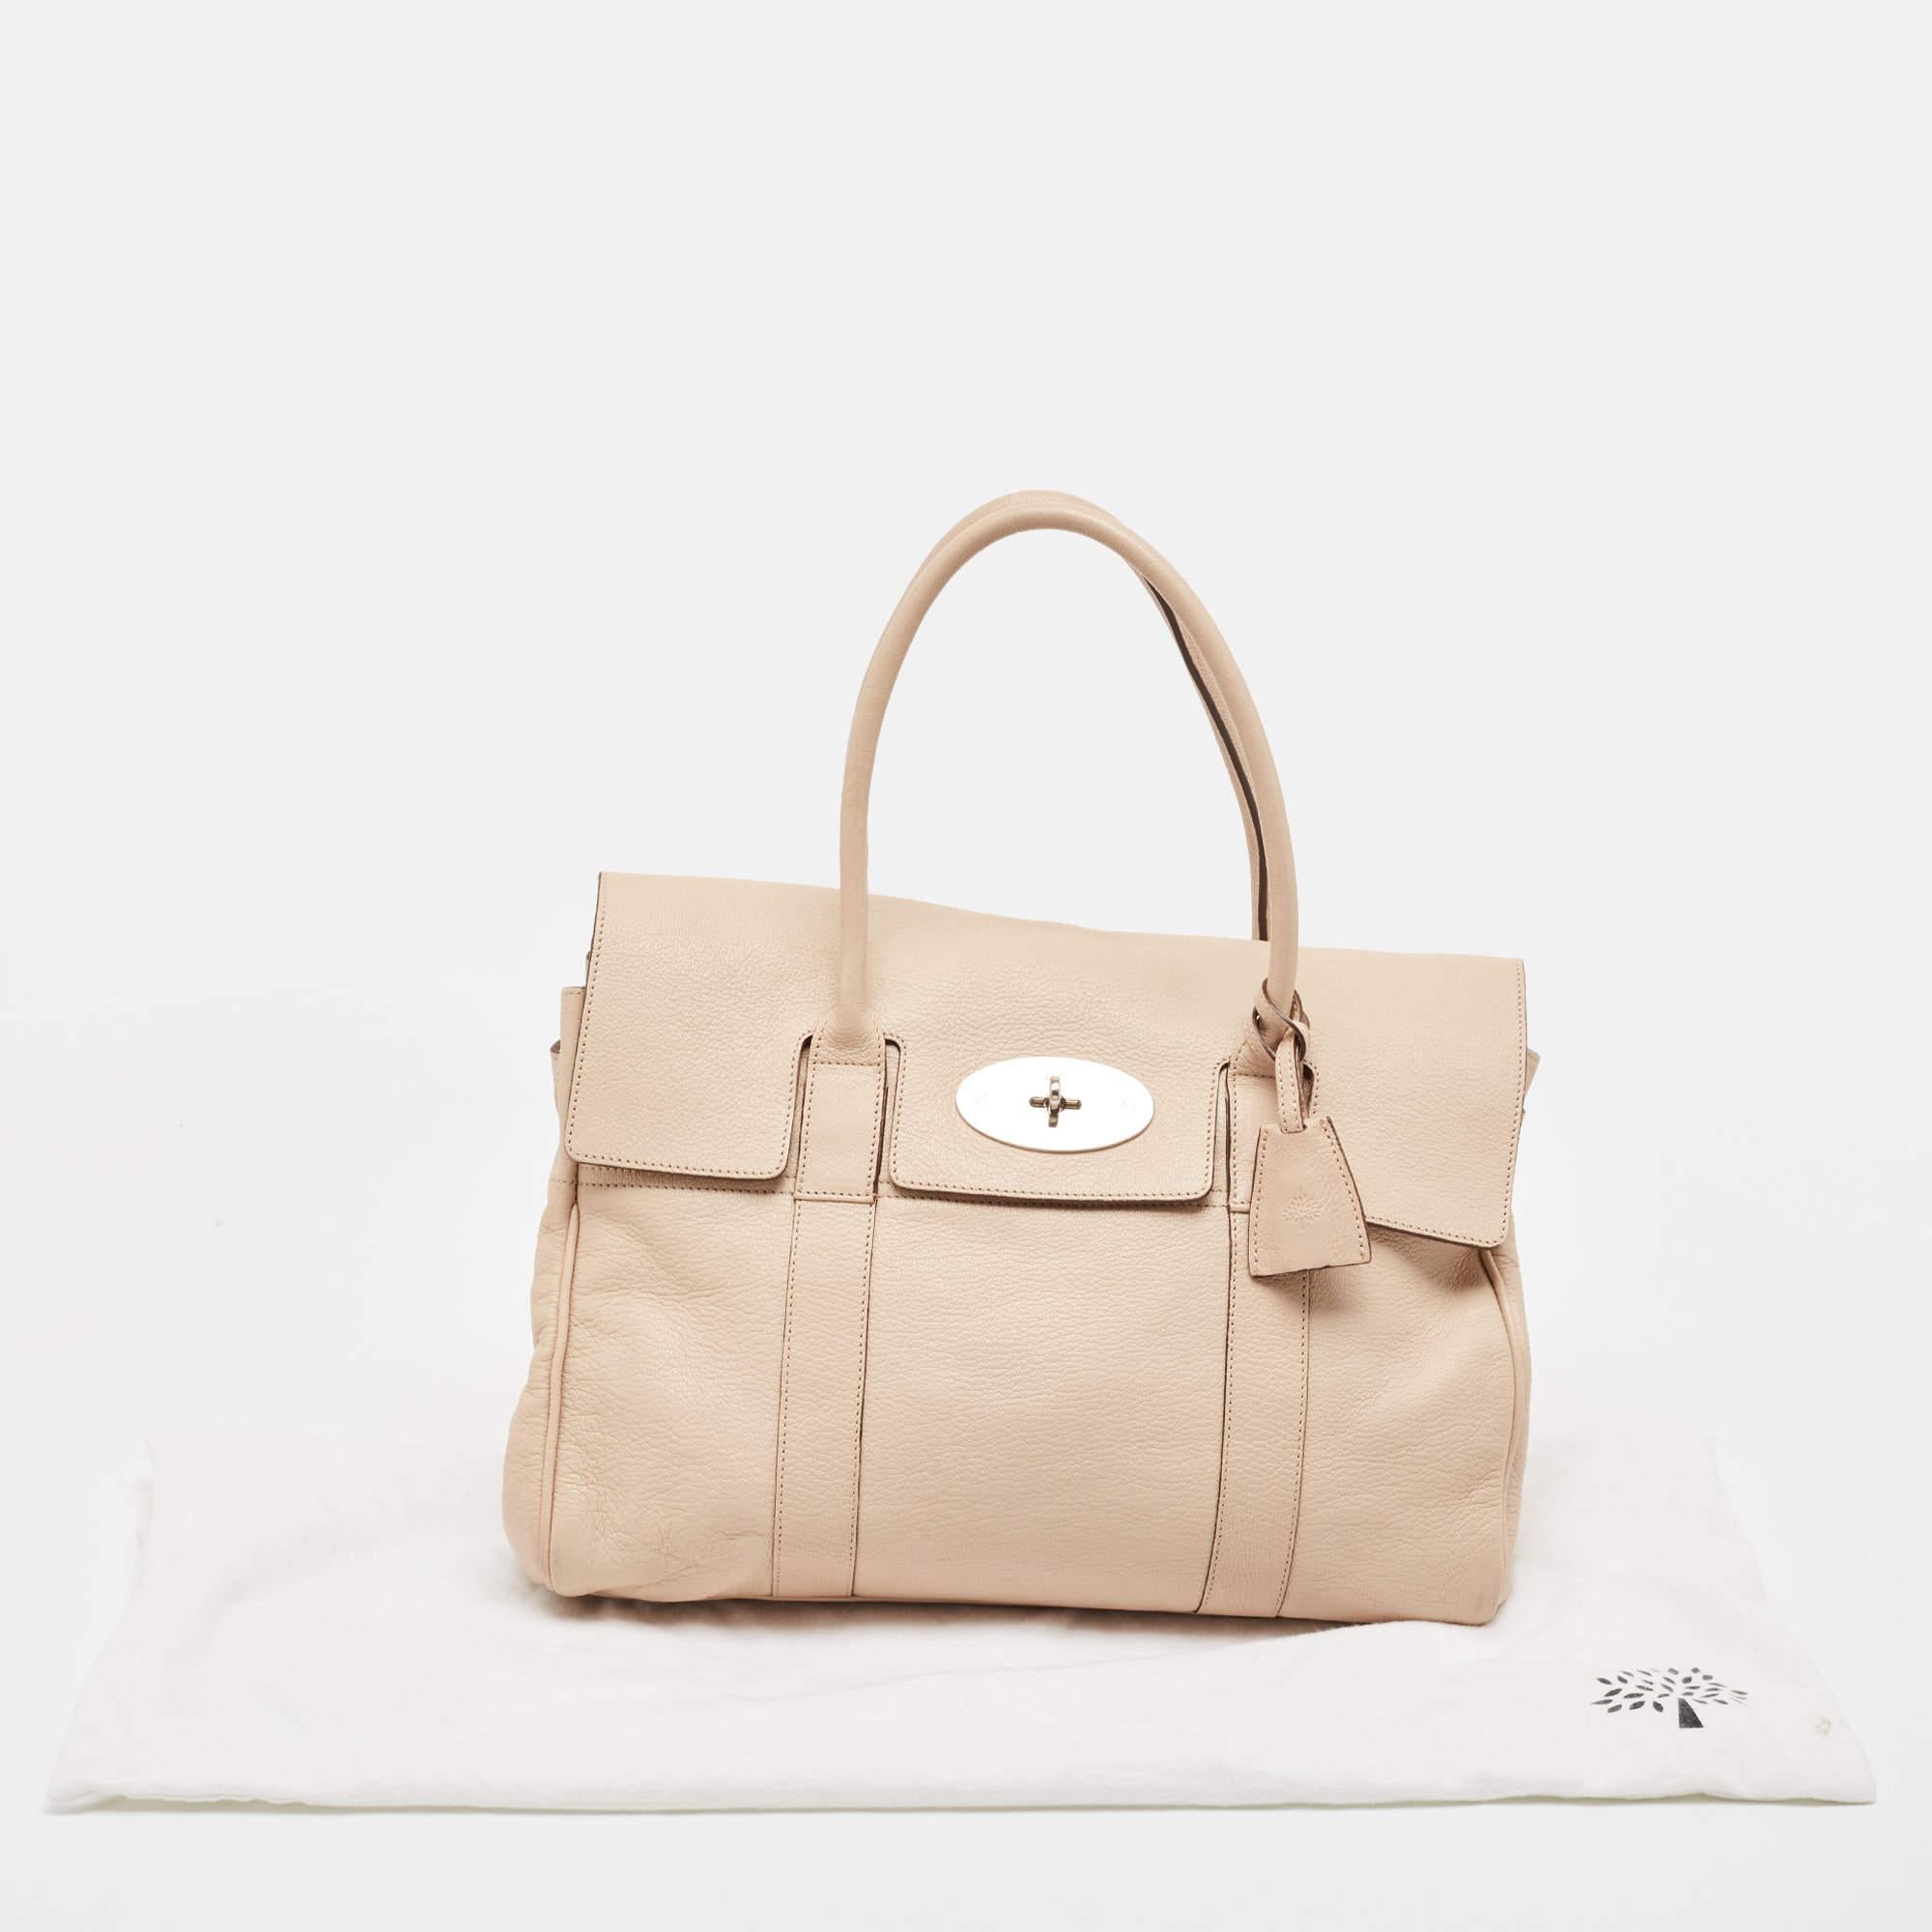 Mulberry Beige Leather Bayswater Satchel 13